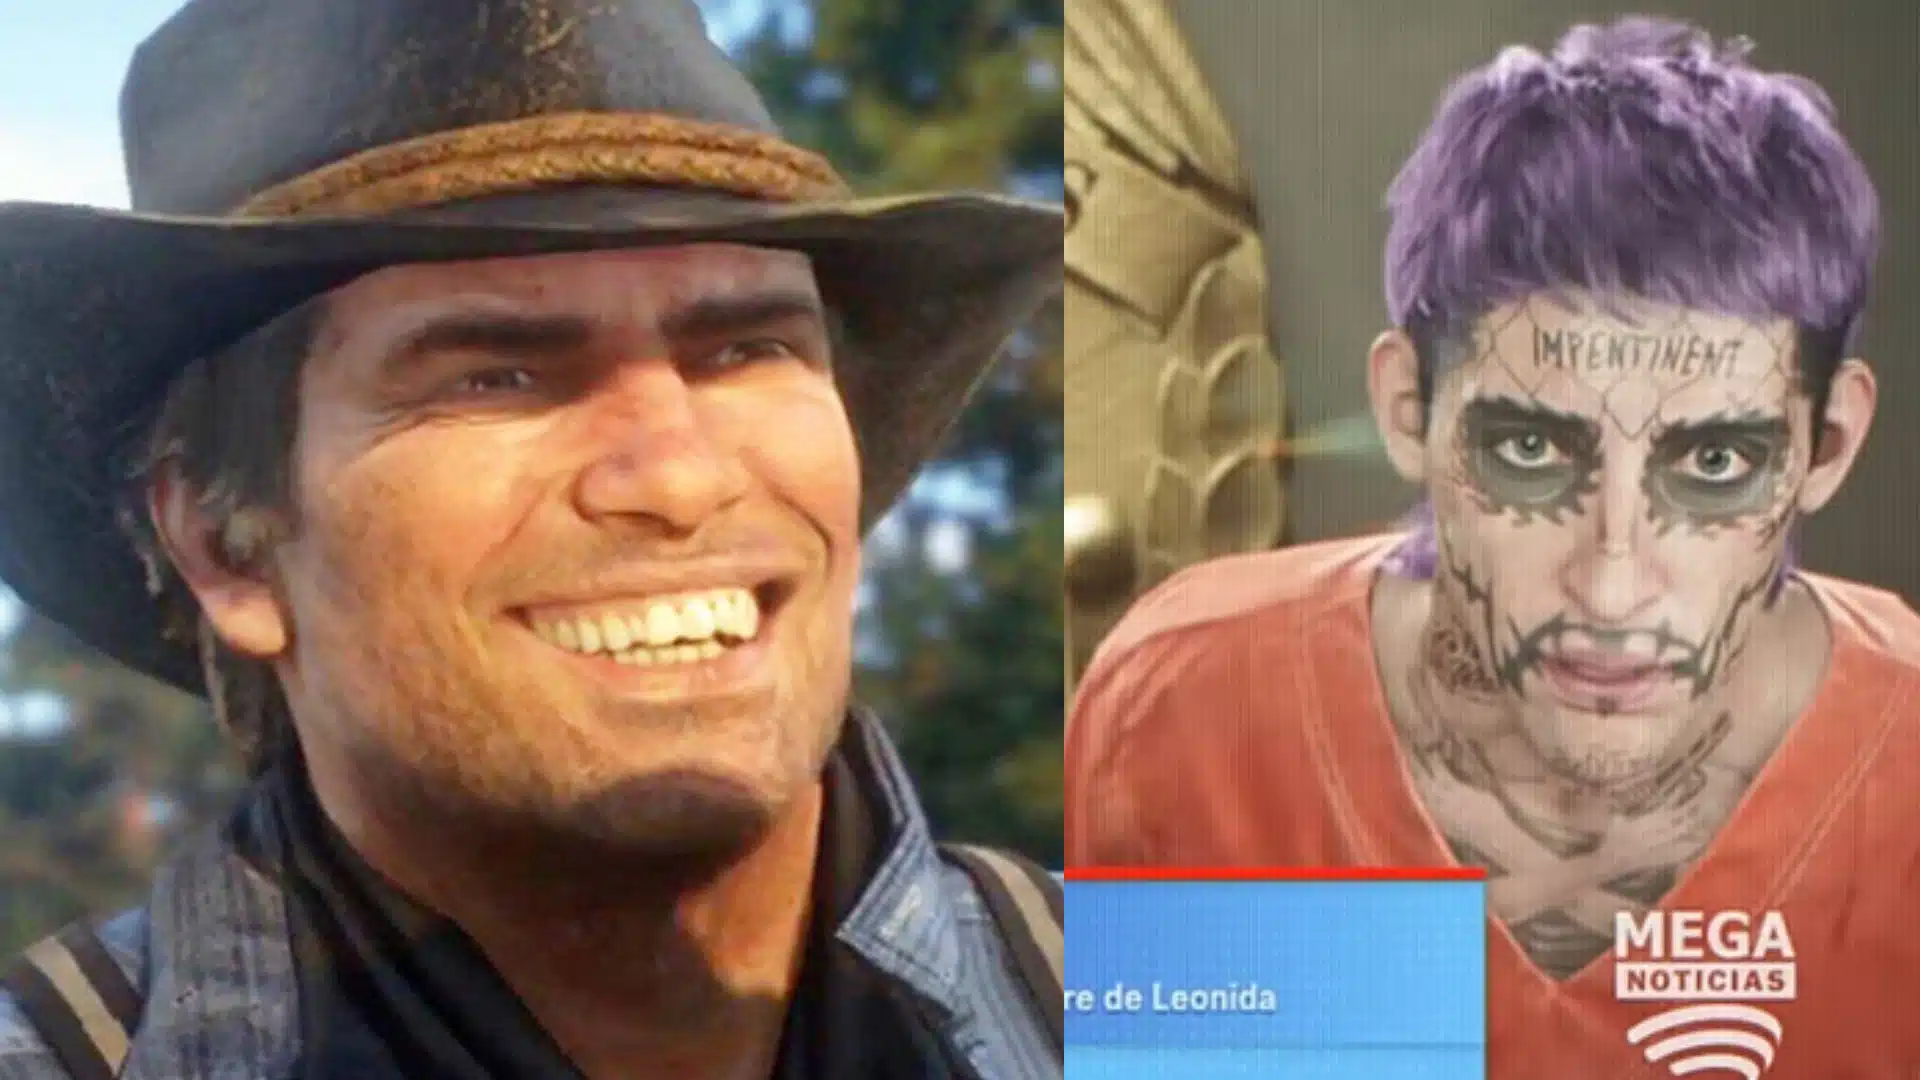 Florida Joker Demands $2 Million From Rockstar Over GTA 6 for Taking His Life; Gets Roasted By Red Dead's Arthur Morgan Instead